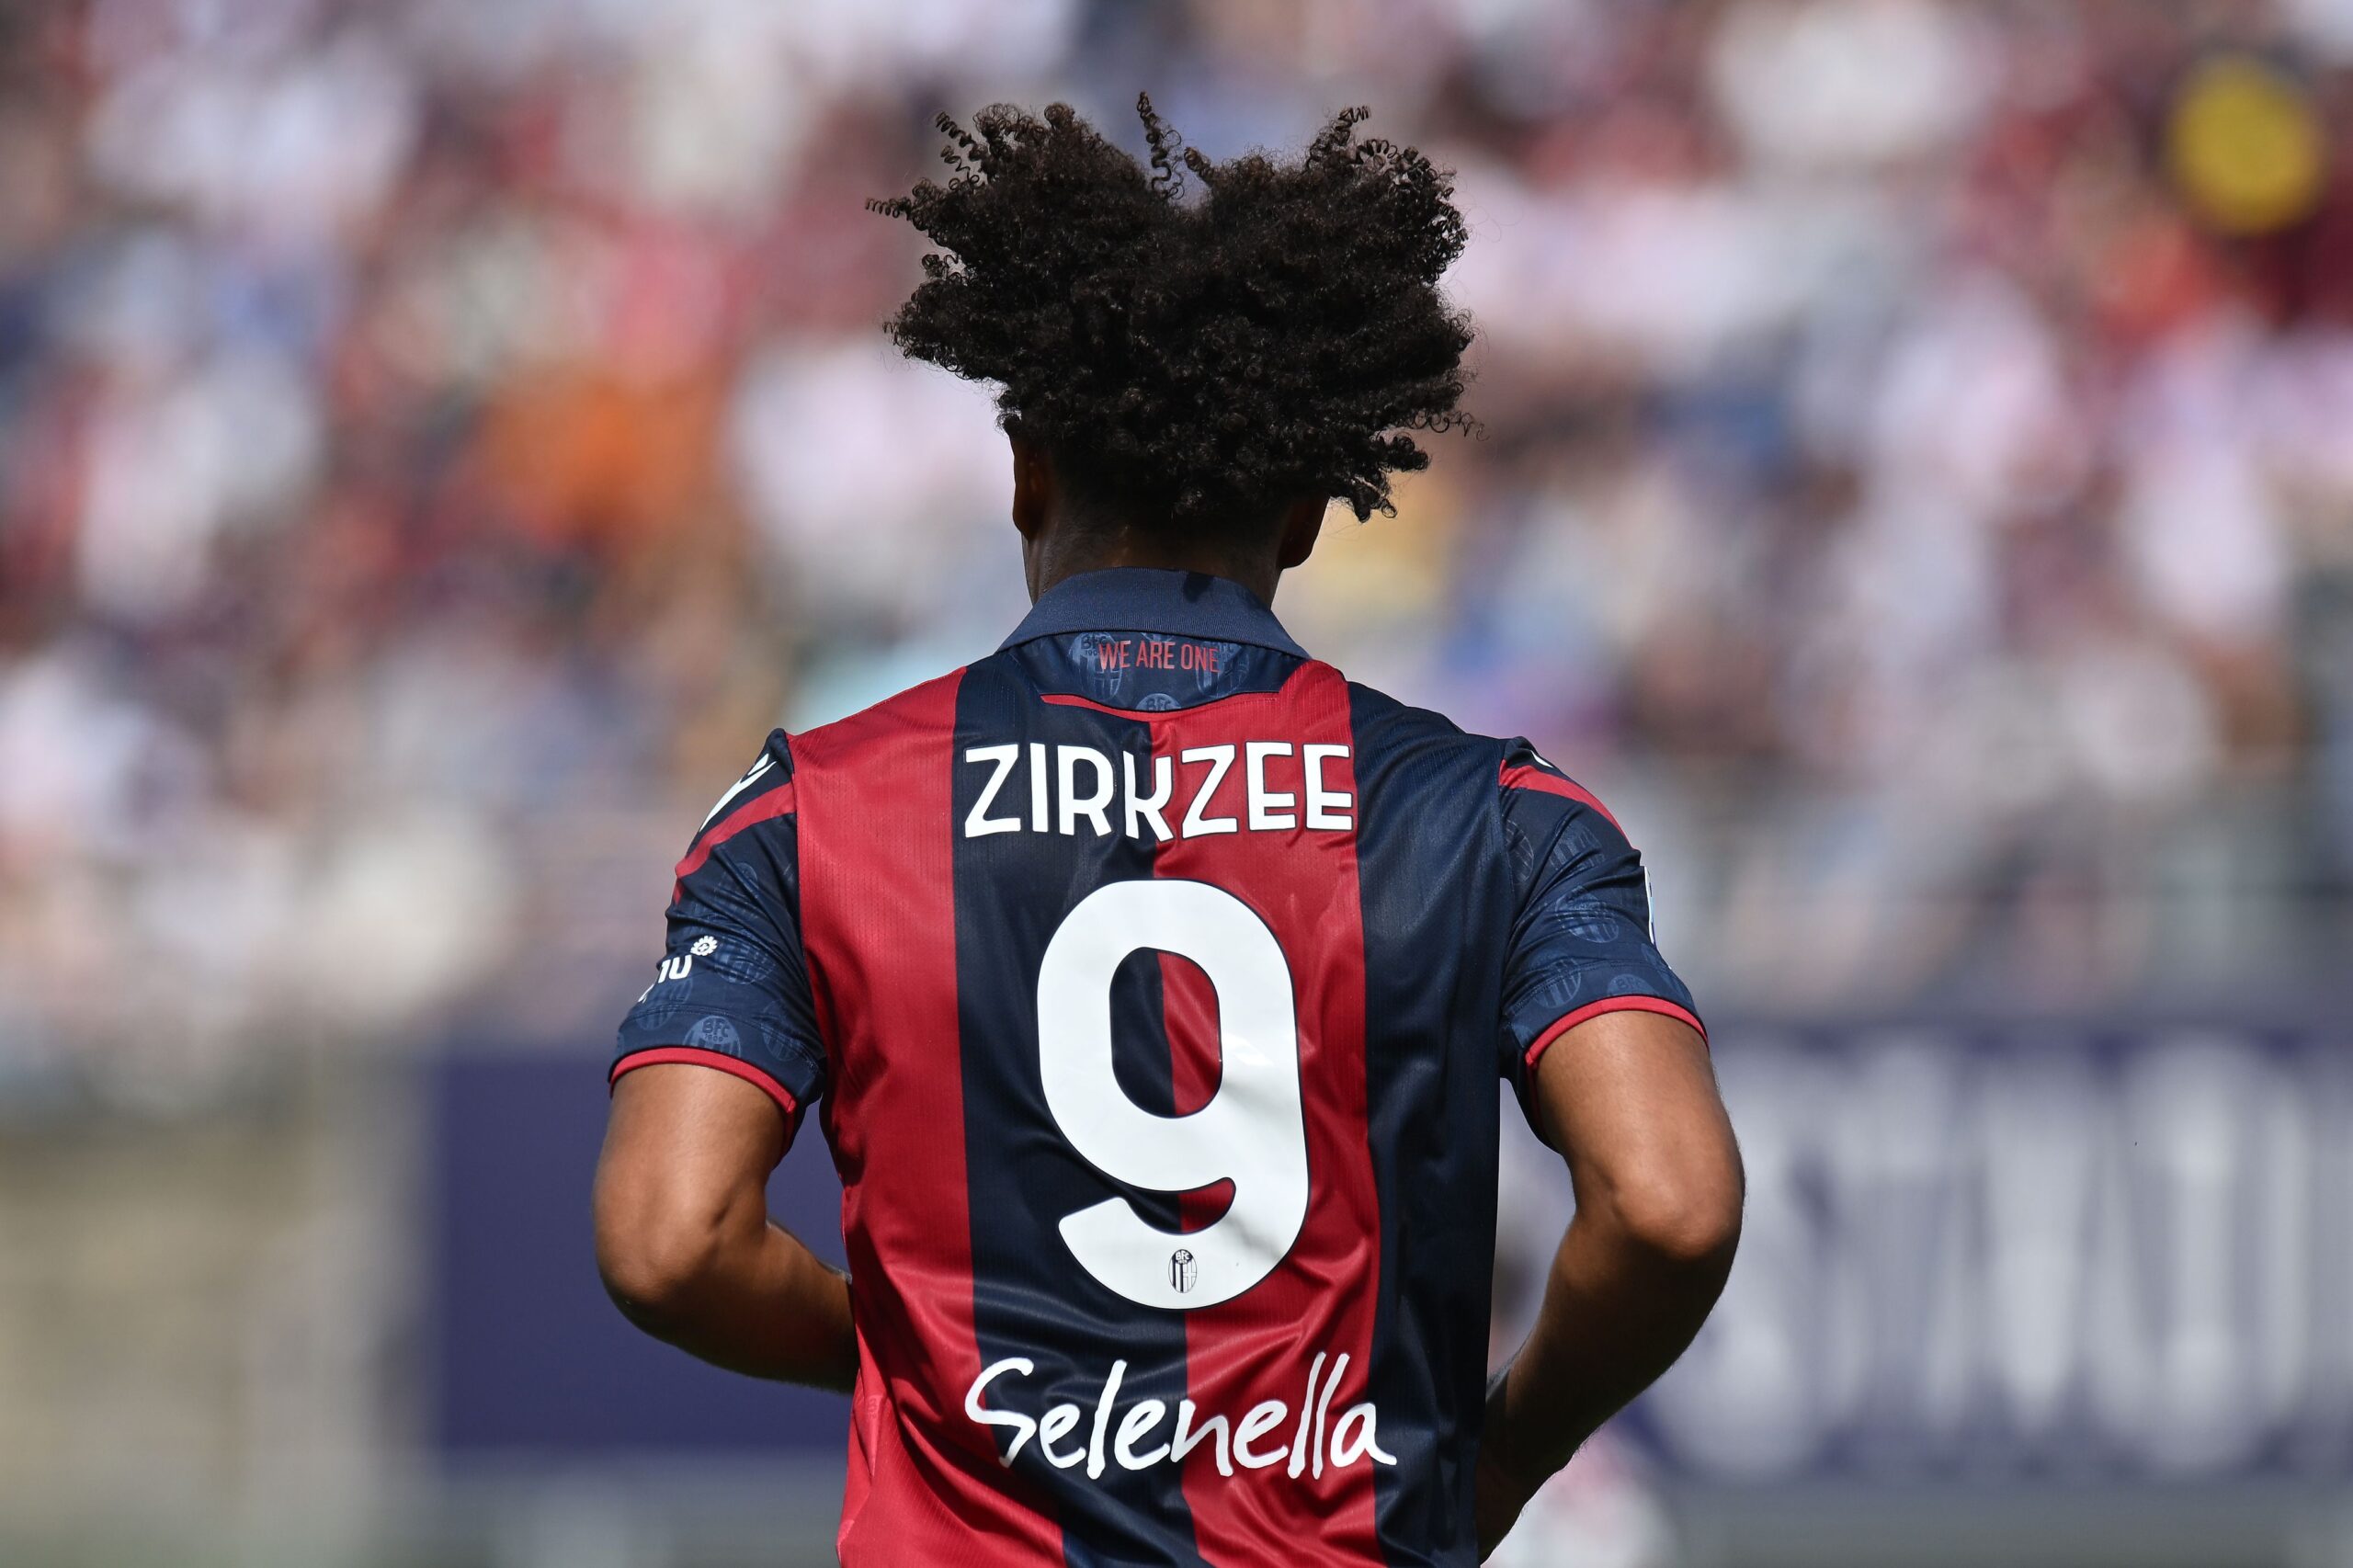 Milan, Juventus, and Arsenal are leading the pack in the fray to sign Joshua Zirkzee, but there’s a long way to go before a resolution.